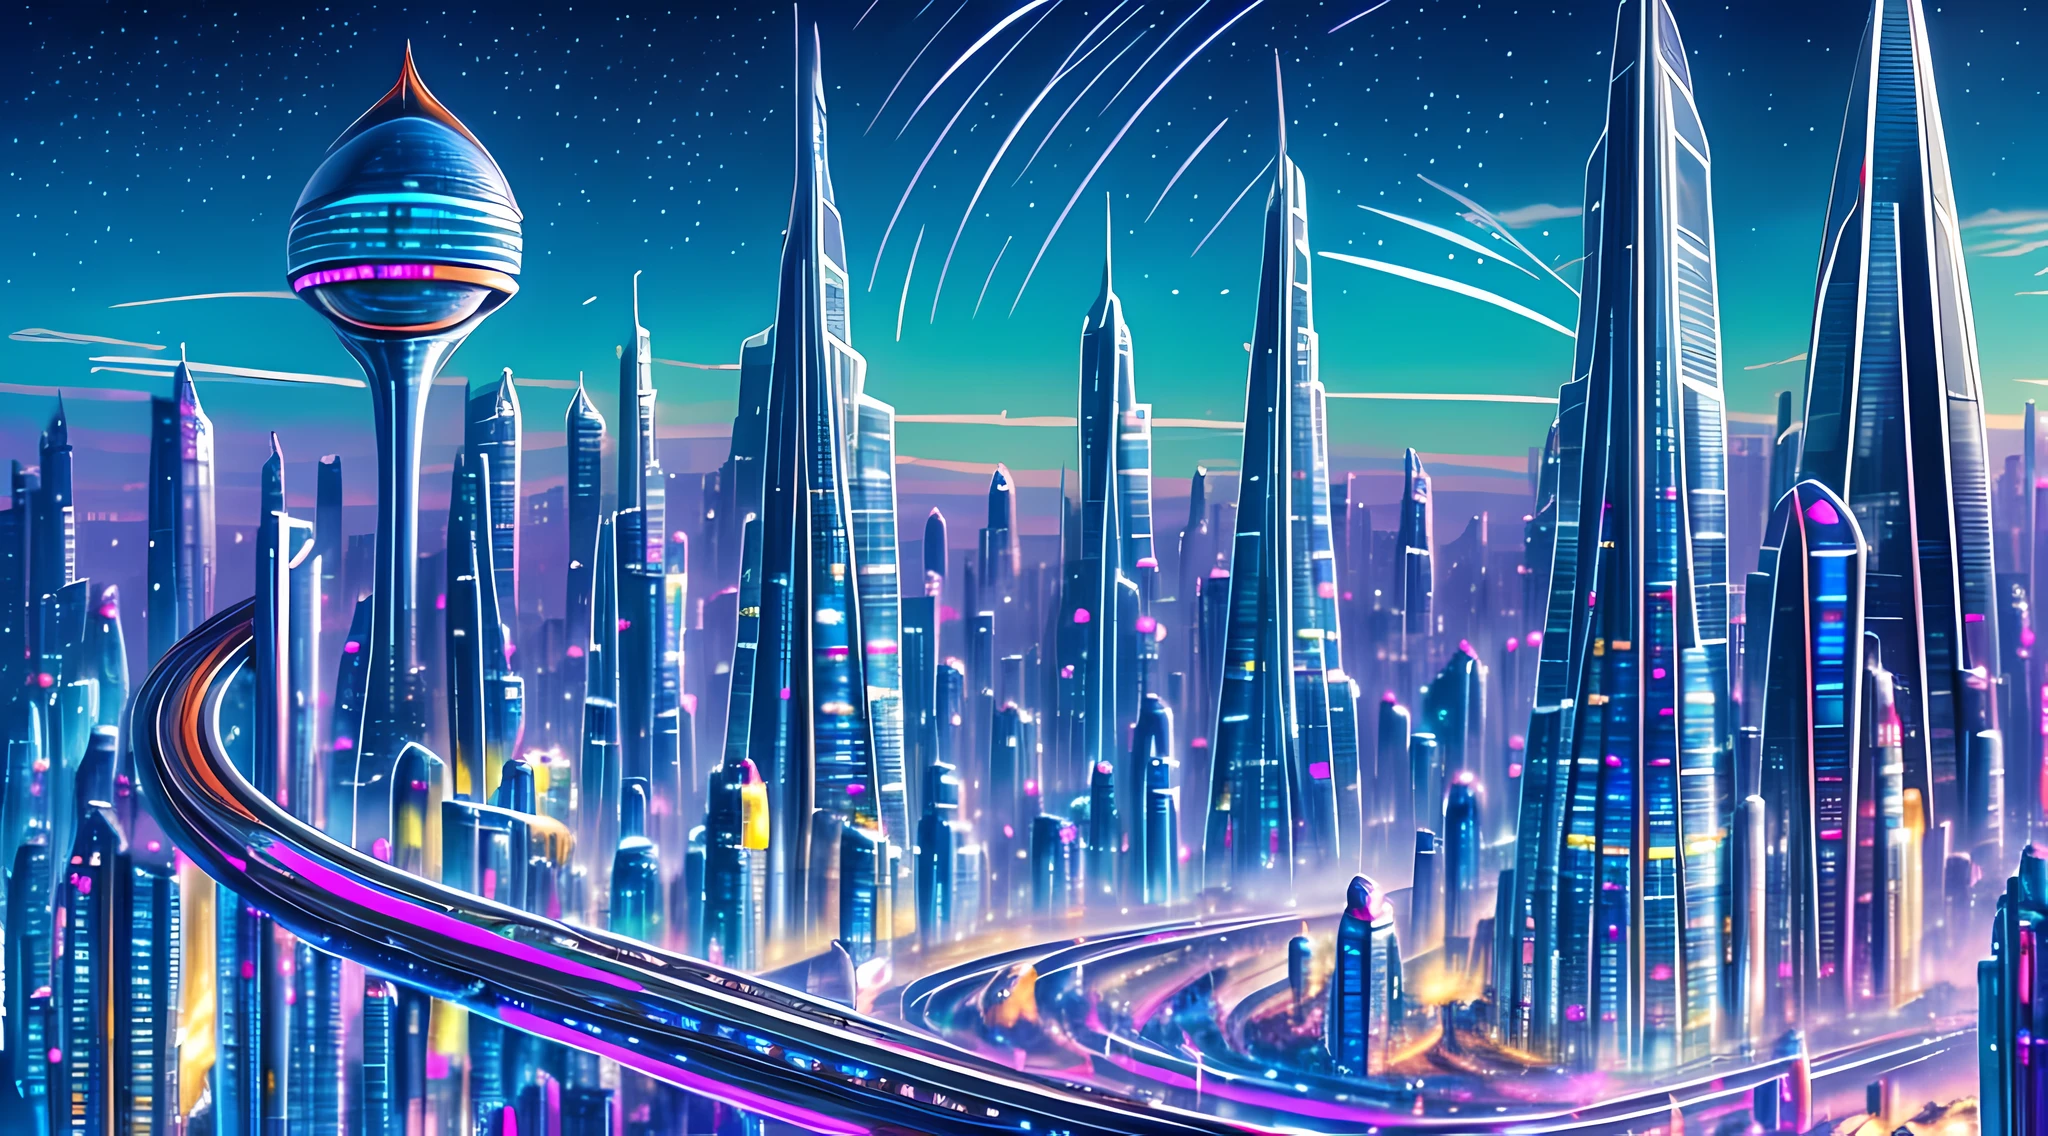 An oil painting of a futuristic cityscape, with towering skyscrapers and flying vehicles filling the frame. The colors are bright and vibrant, with shades of blue, green, and purple dominating the scene. In the foreground, a group of people can be seen walking towards a giant, glowing pyramid.